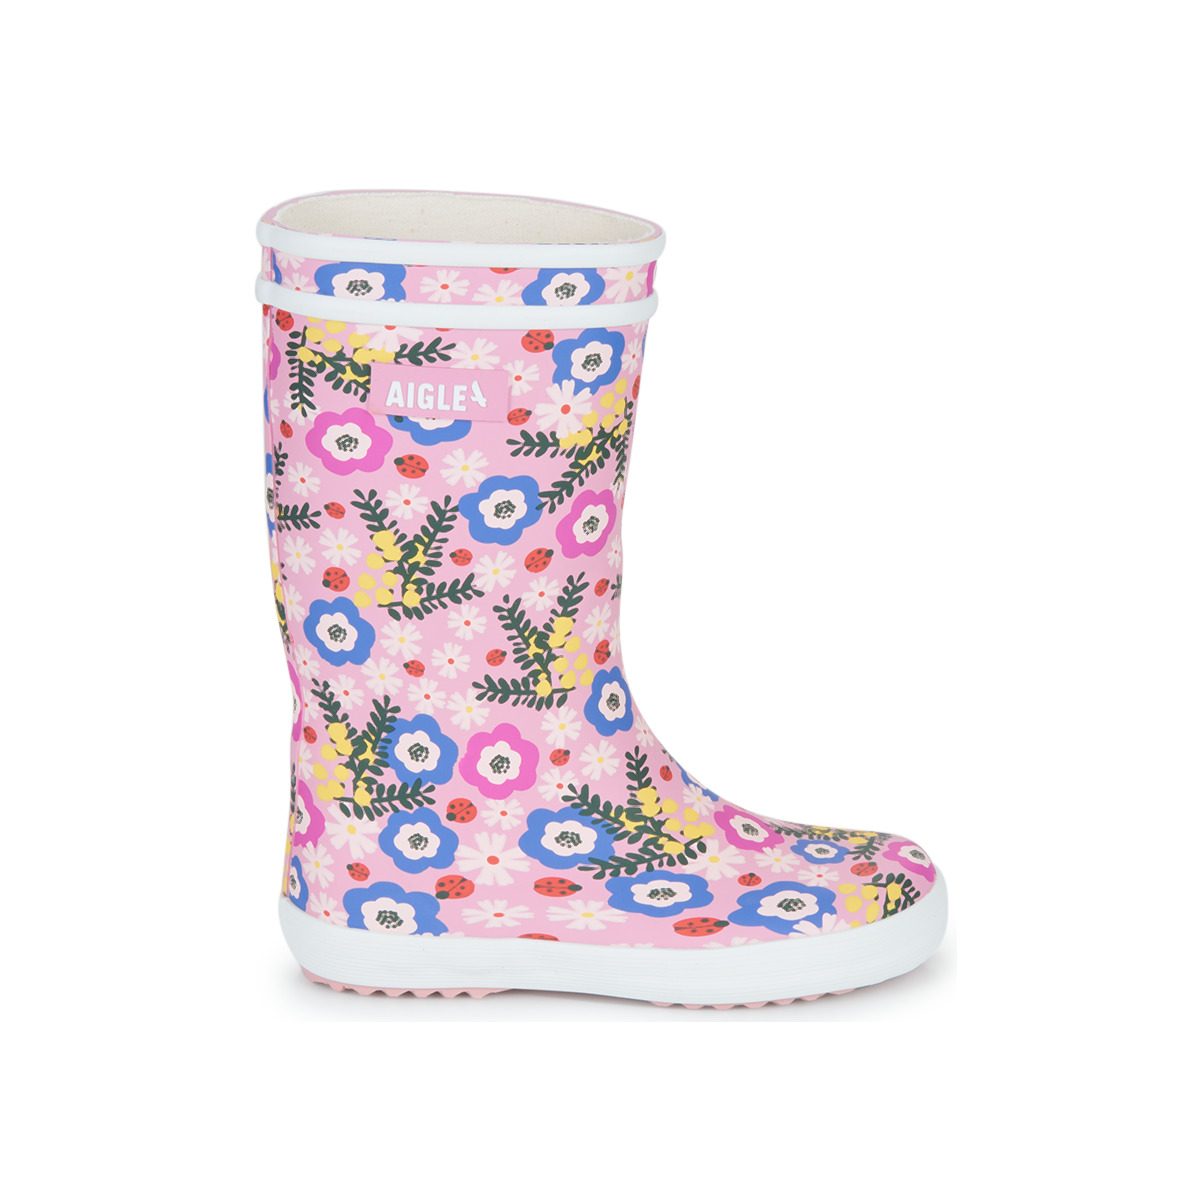 Aigle Rose / Multicolore LOLLY POP PLAY2 Bsf9A18x